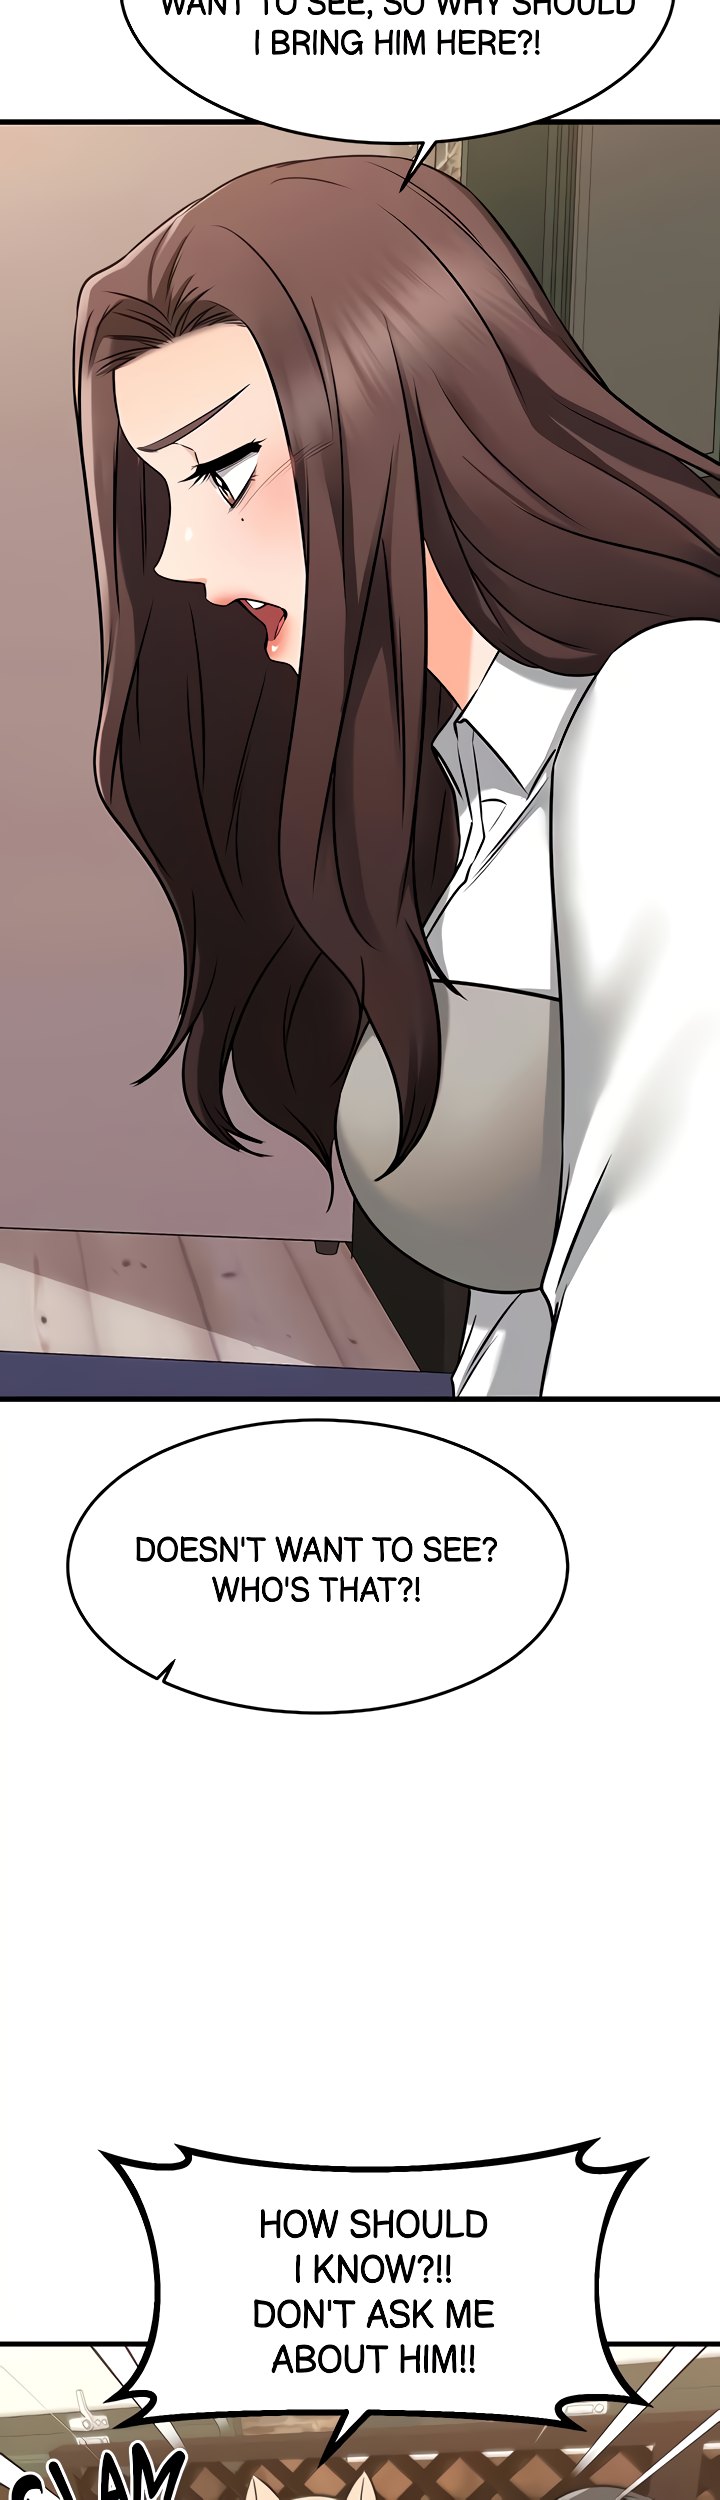 My Female Friend Who Crossed The Line - Chapter 62 Page 43